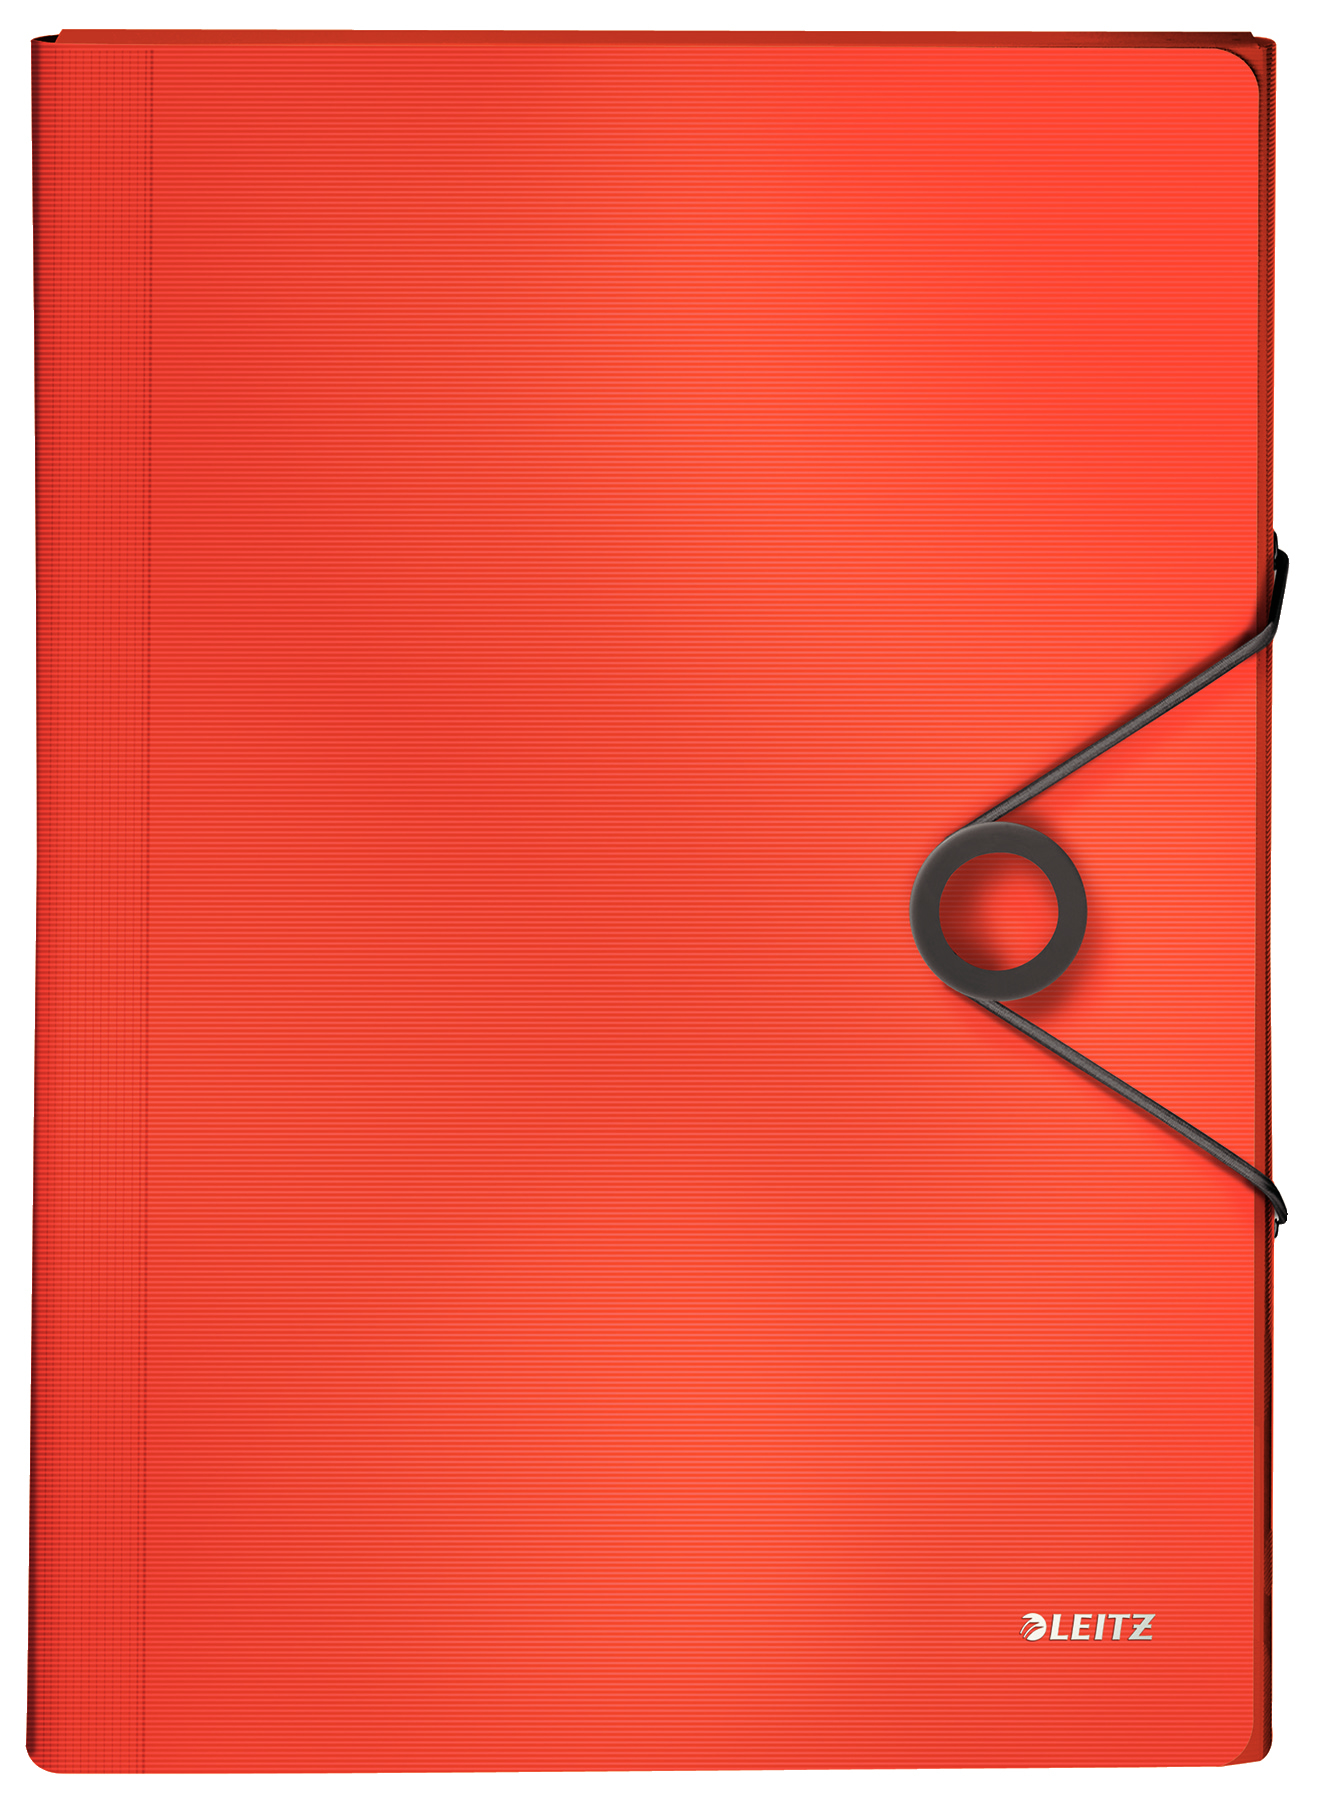 LEITZ Dossier project Solid PP A4 45791020 rouge clair